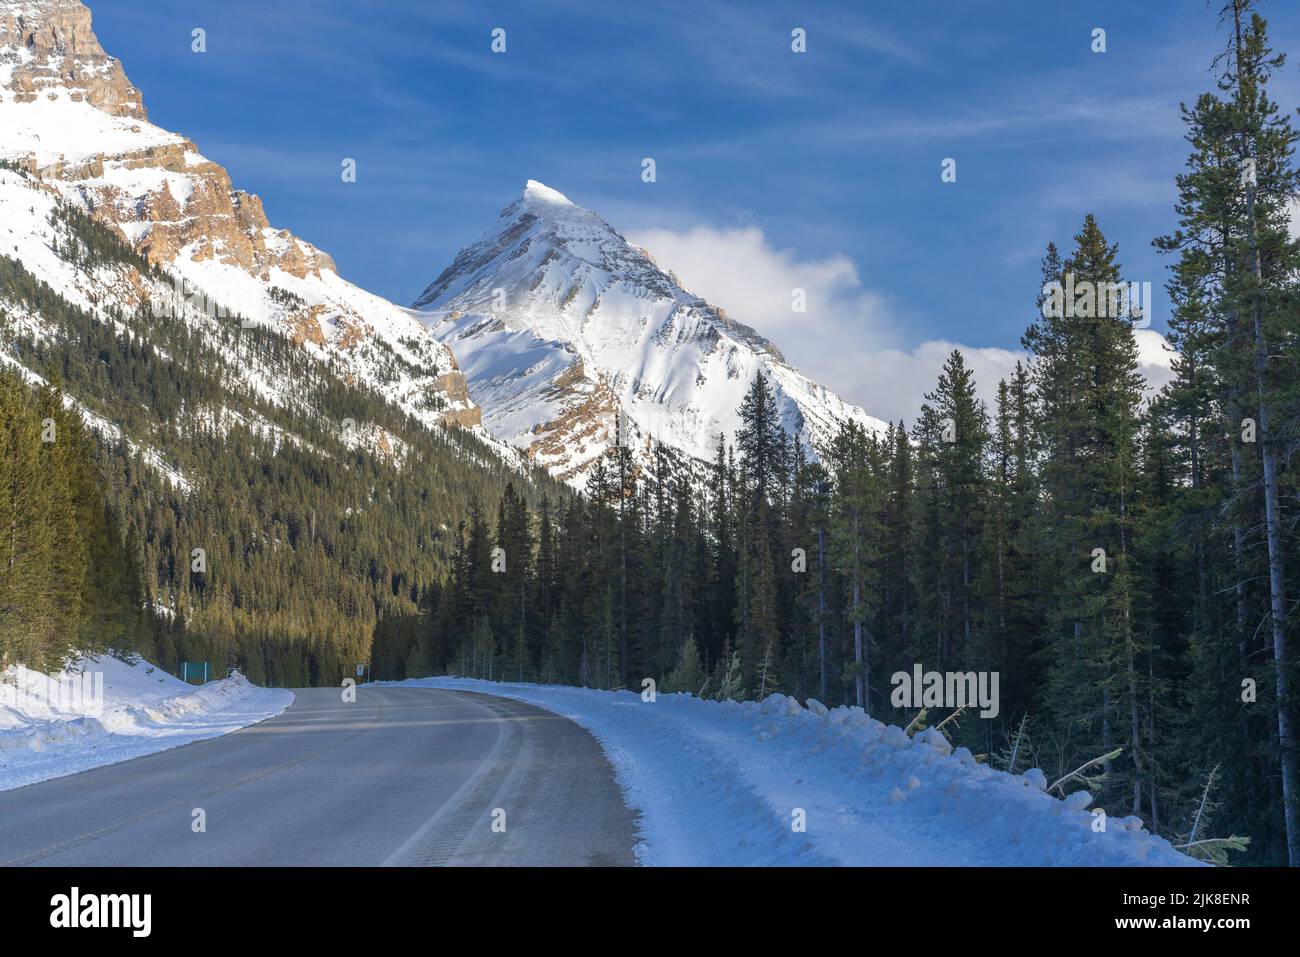 A scenic mountain view along the Icefields Parkway, Banff National Park, Alberta, Canada. Stock Photo